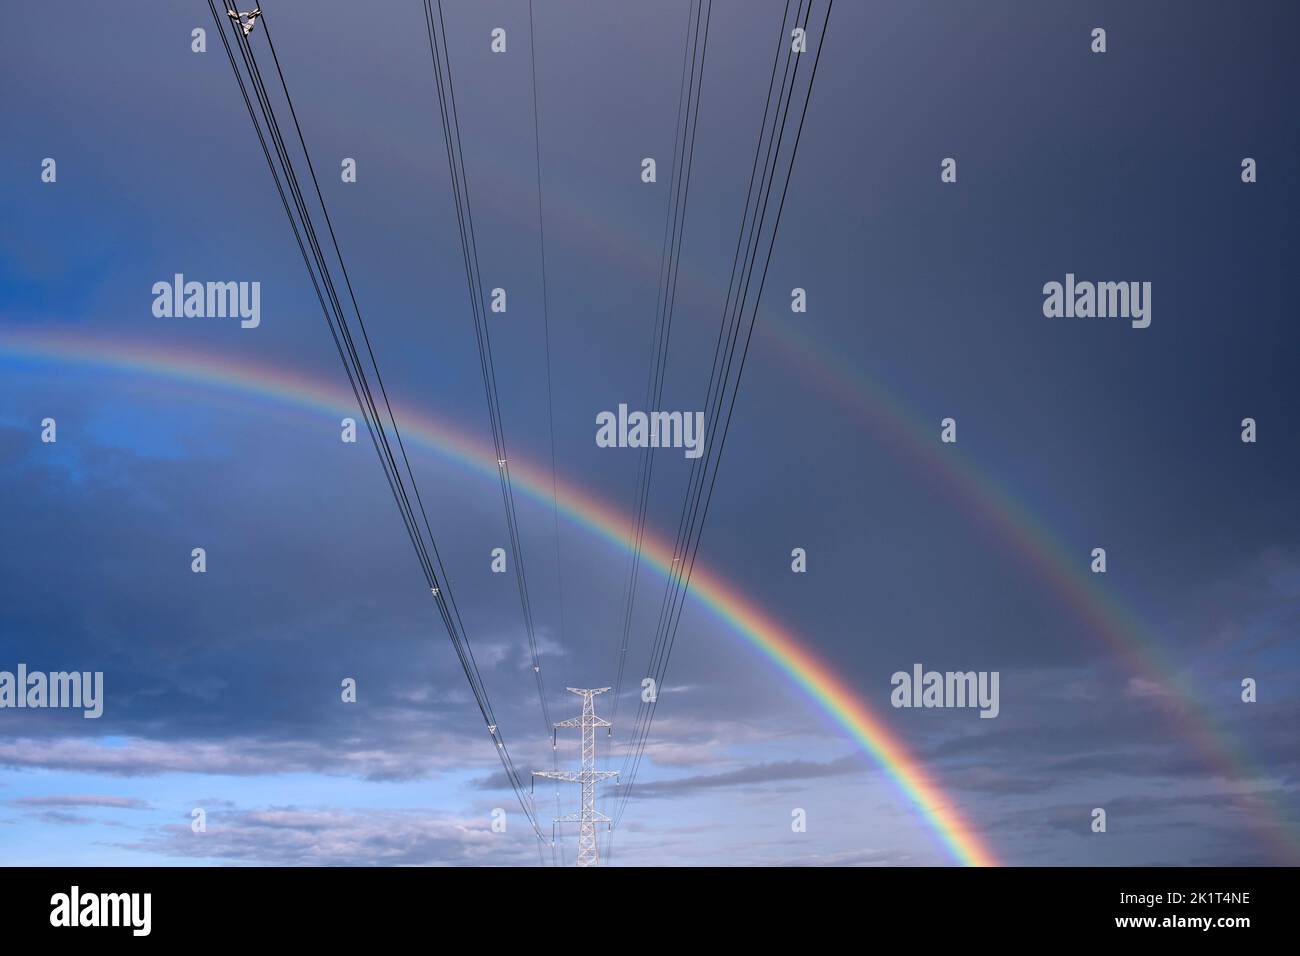 High-voltage power lines and double rainbow in the sky Stock Photo